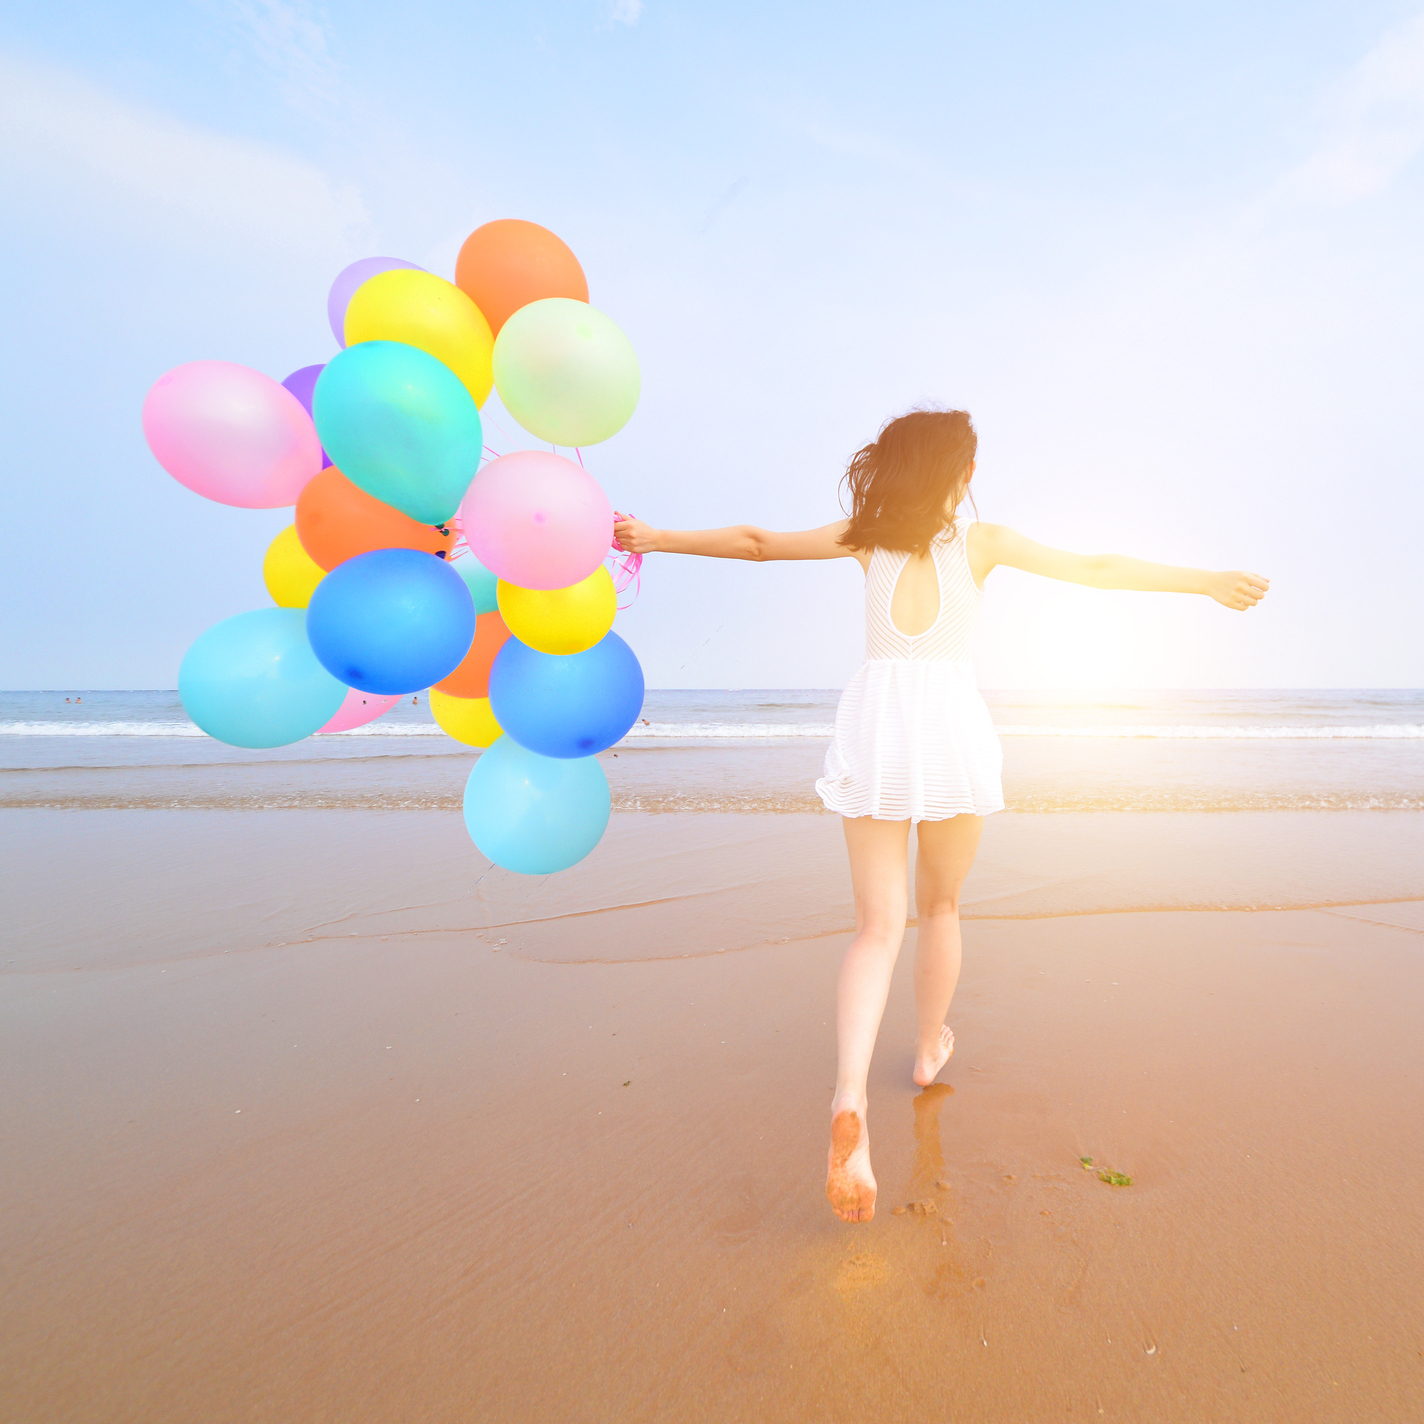 Woman at the beach, walking on the shore with vibrant balloons.